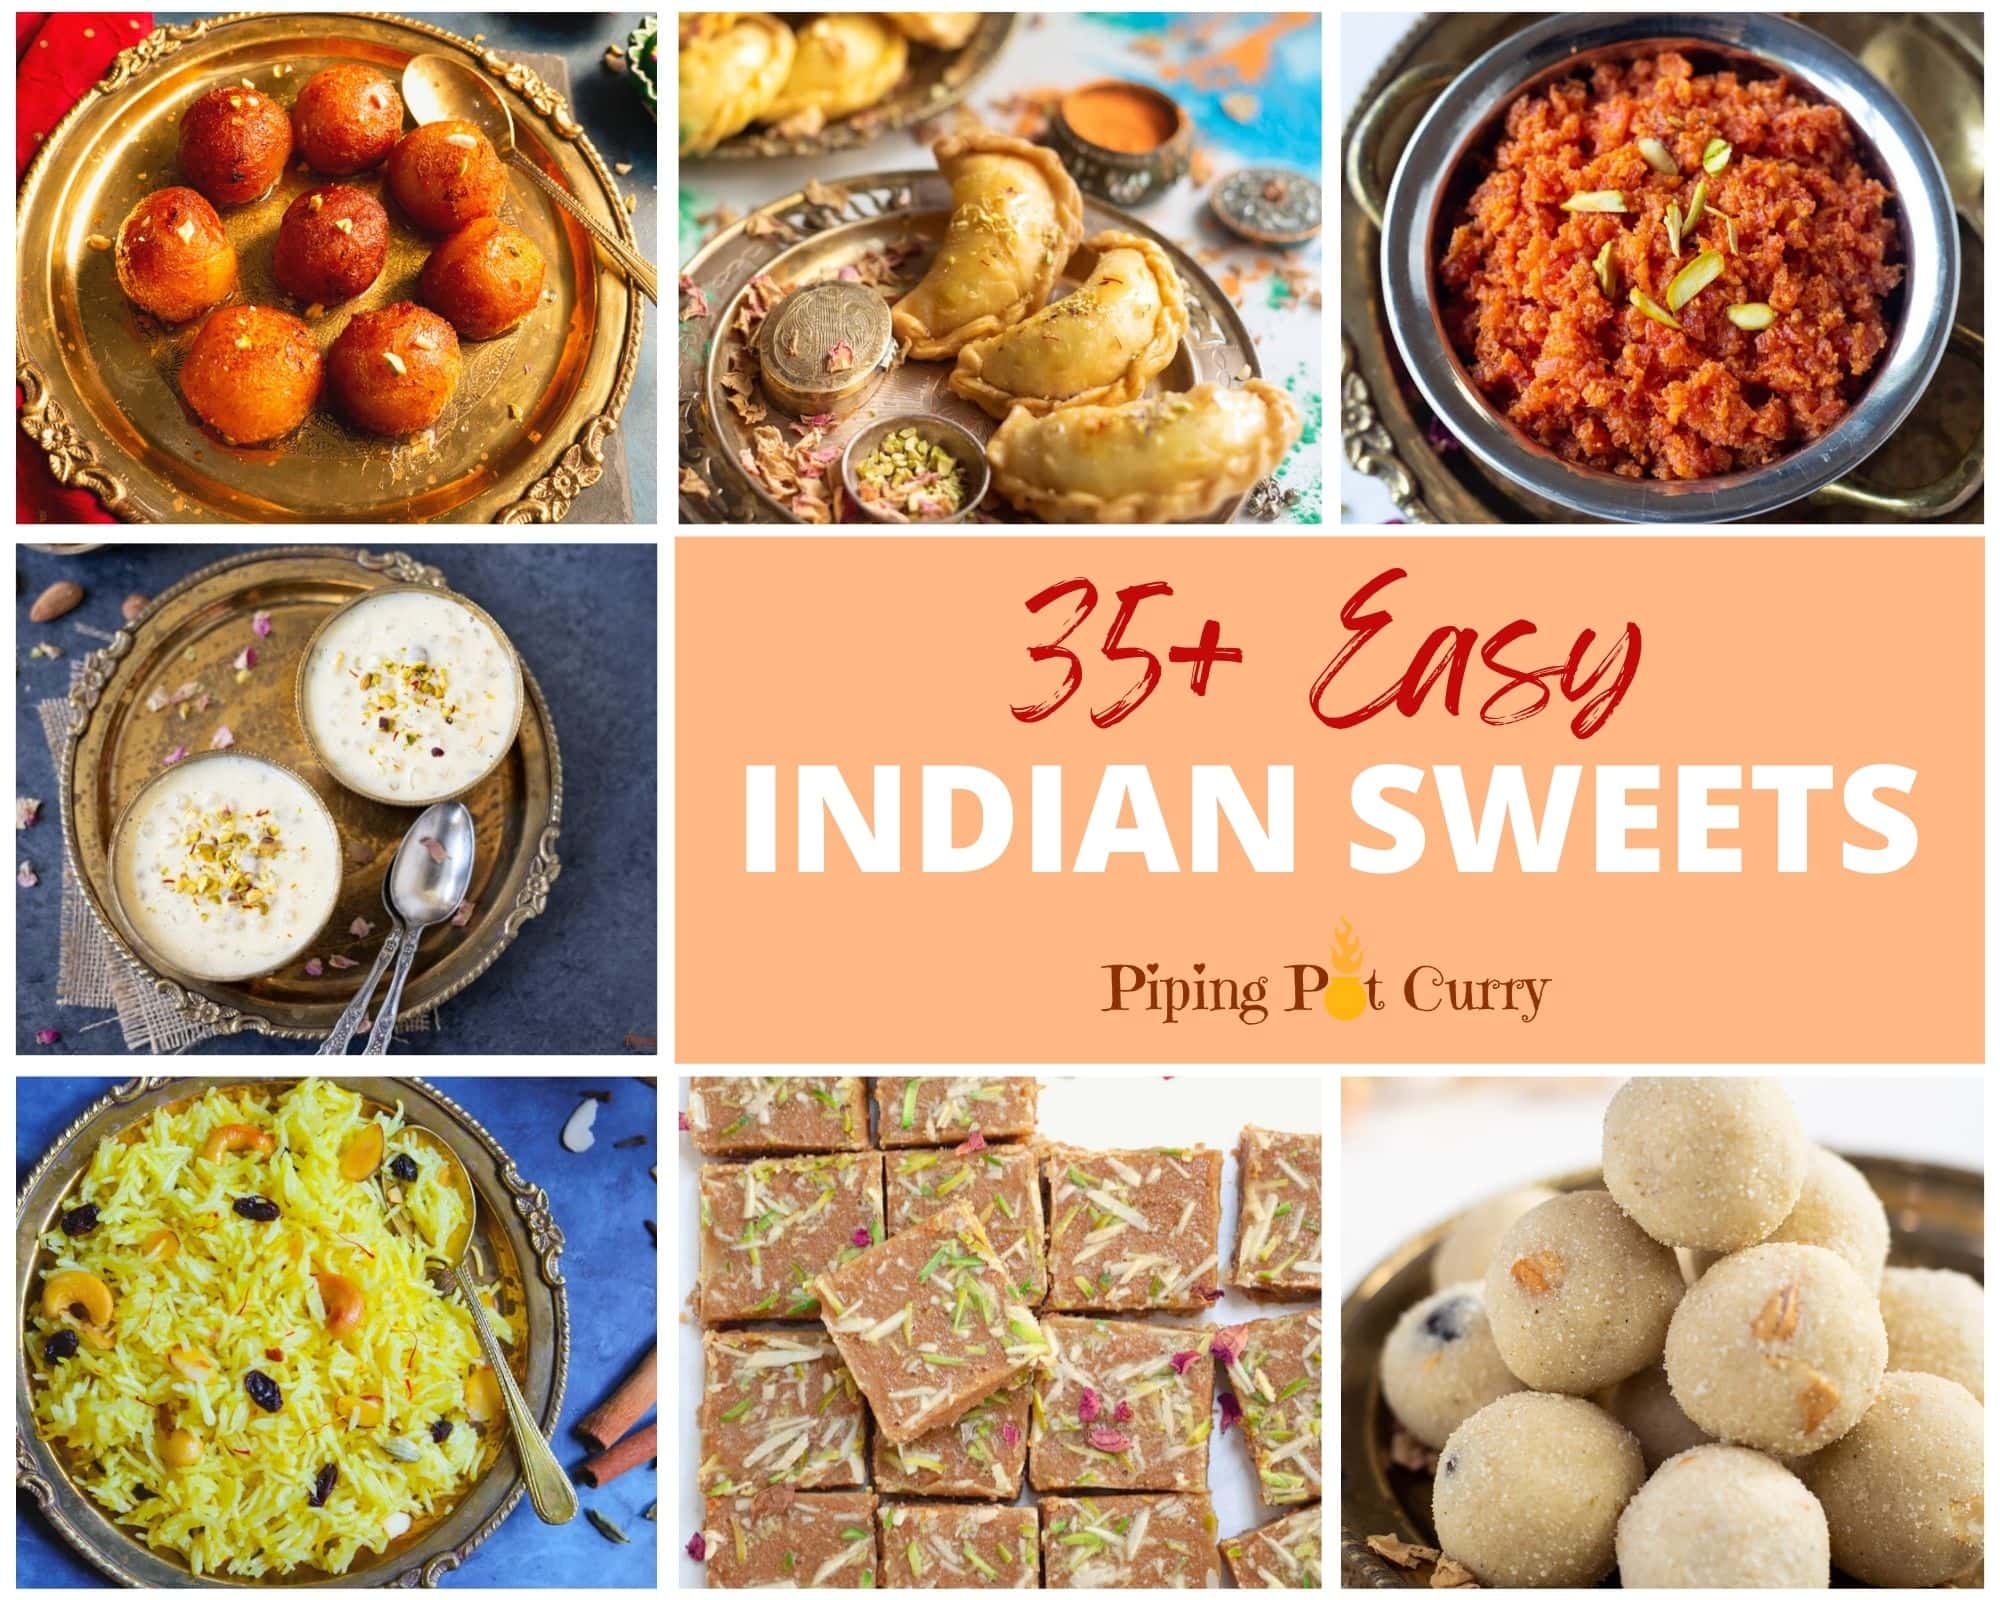 35+ Easy Indian Sweets (Dessert Recipes)